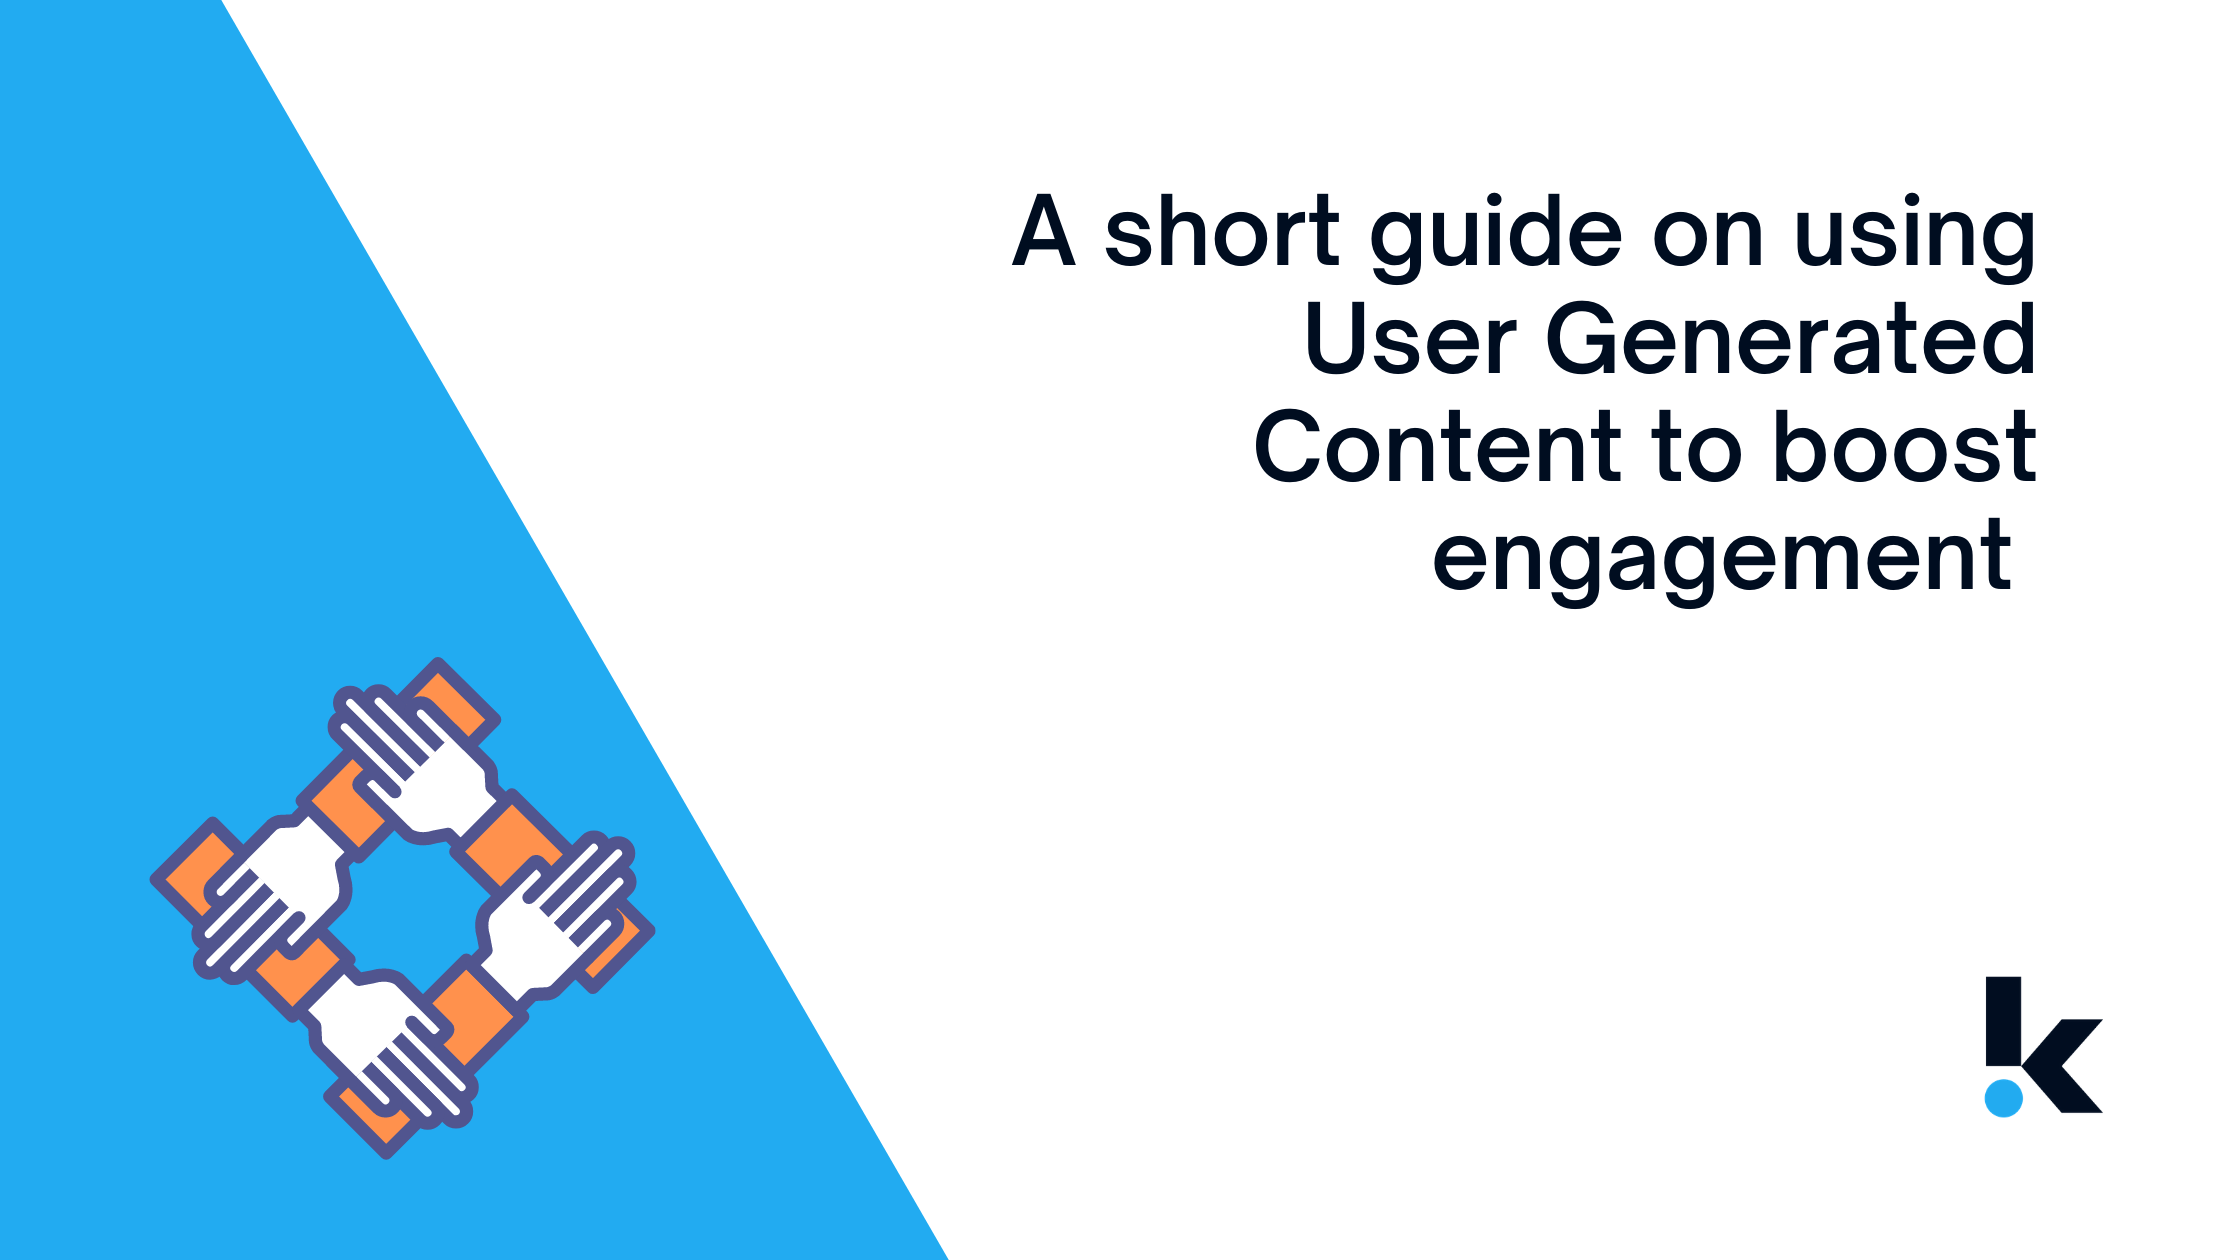 Want to know how to use User Generated Content to boost engagement for your brand? Read this short guide from Komo Digital for more information.